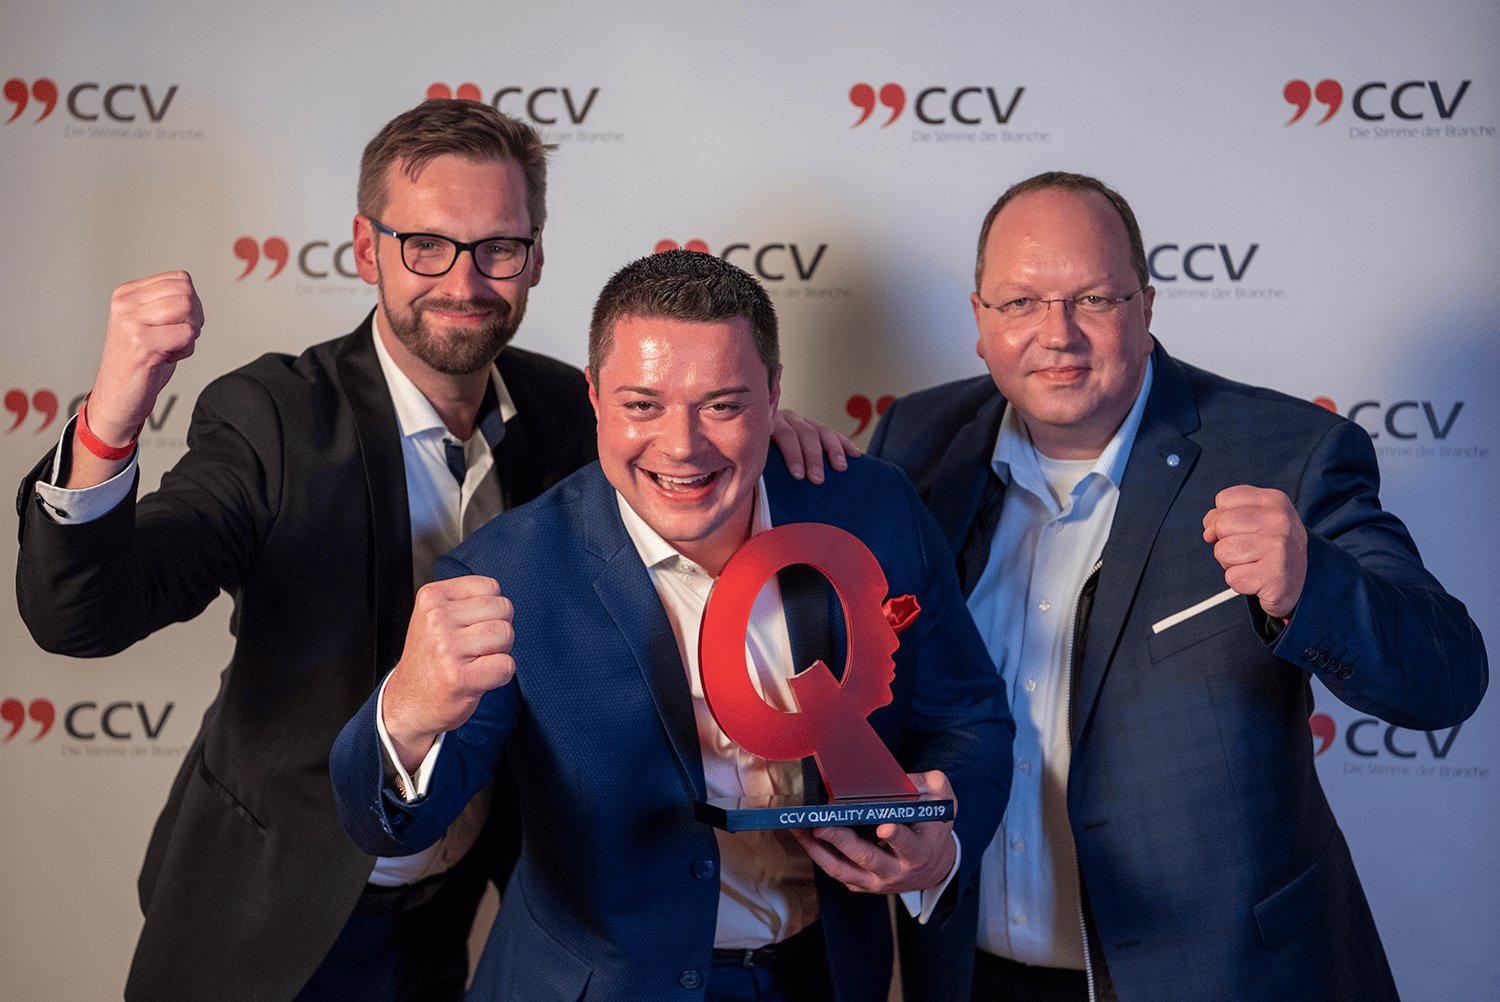 CCV Quality Award: mobile.de and oneclick win in the category of IT innovation